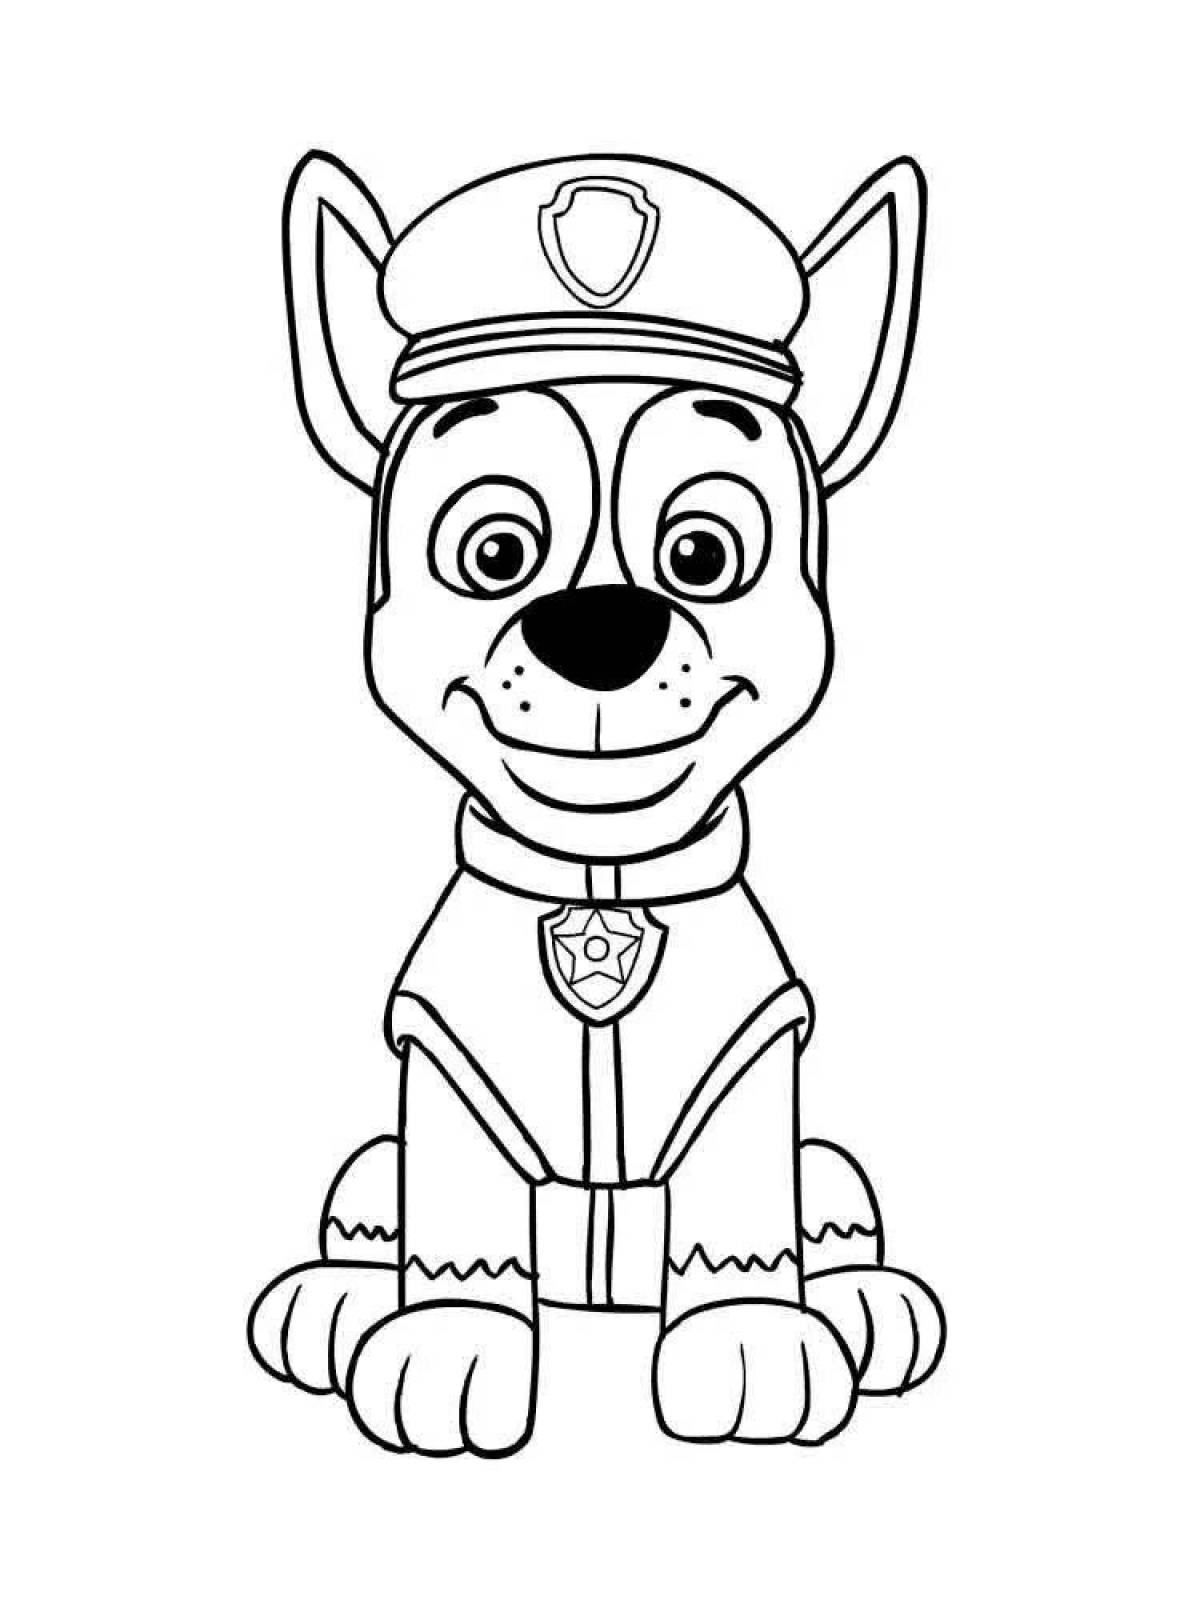 Coloring page with racing driver